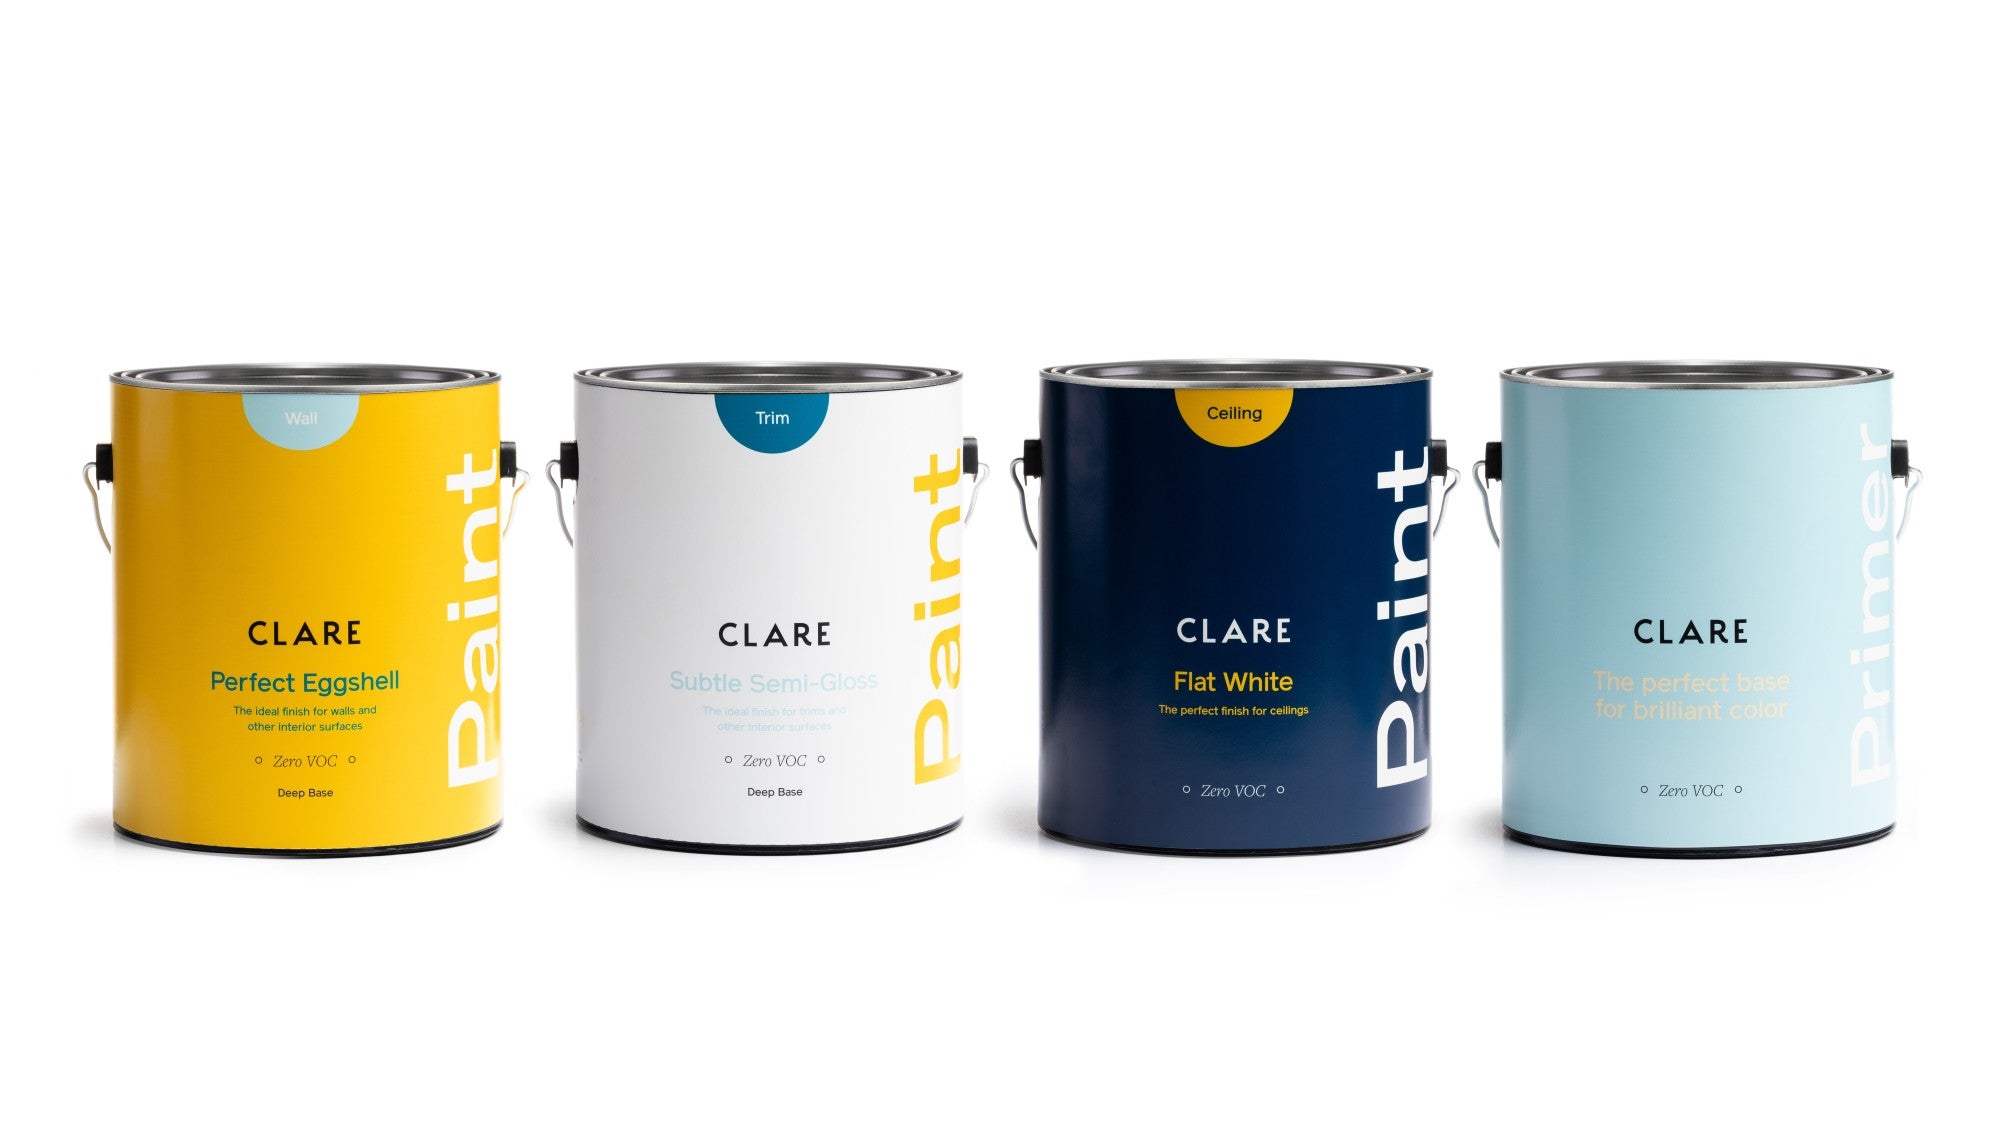 Clare paint cans. Modern paint packaging. Premium paint is the key to a flawless paint job